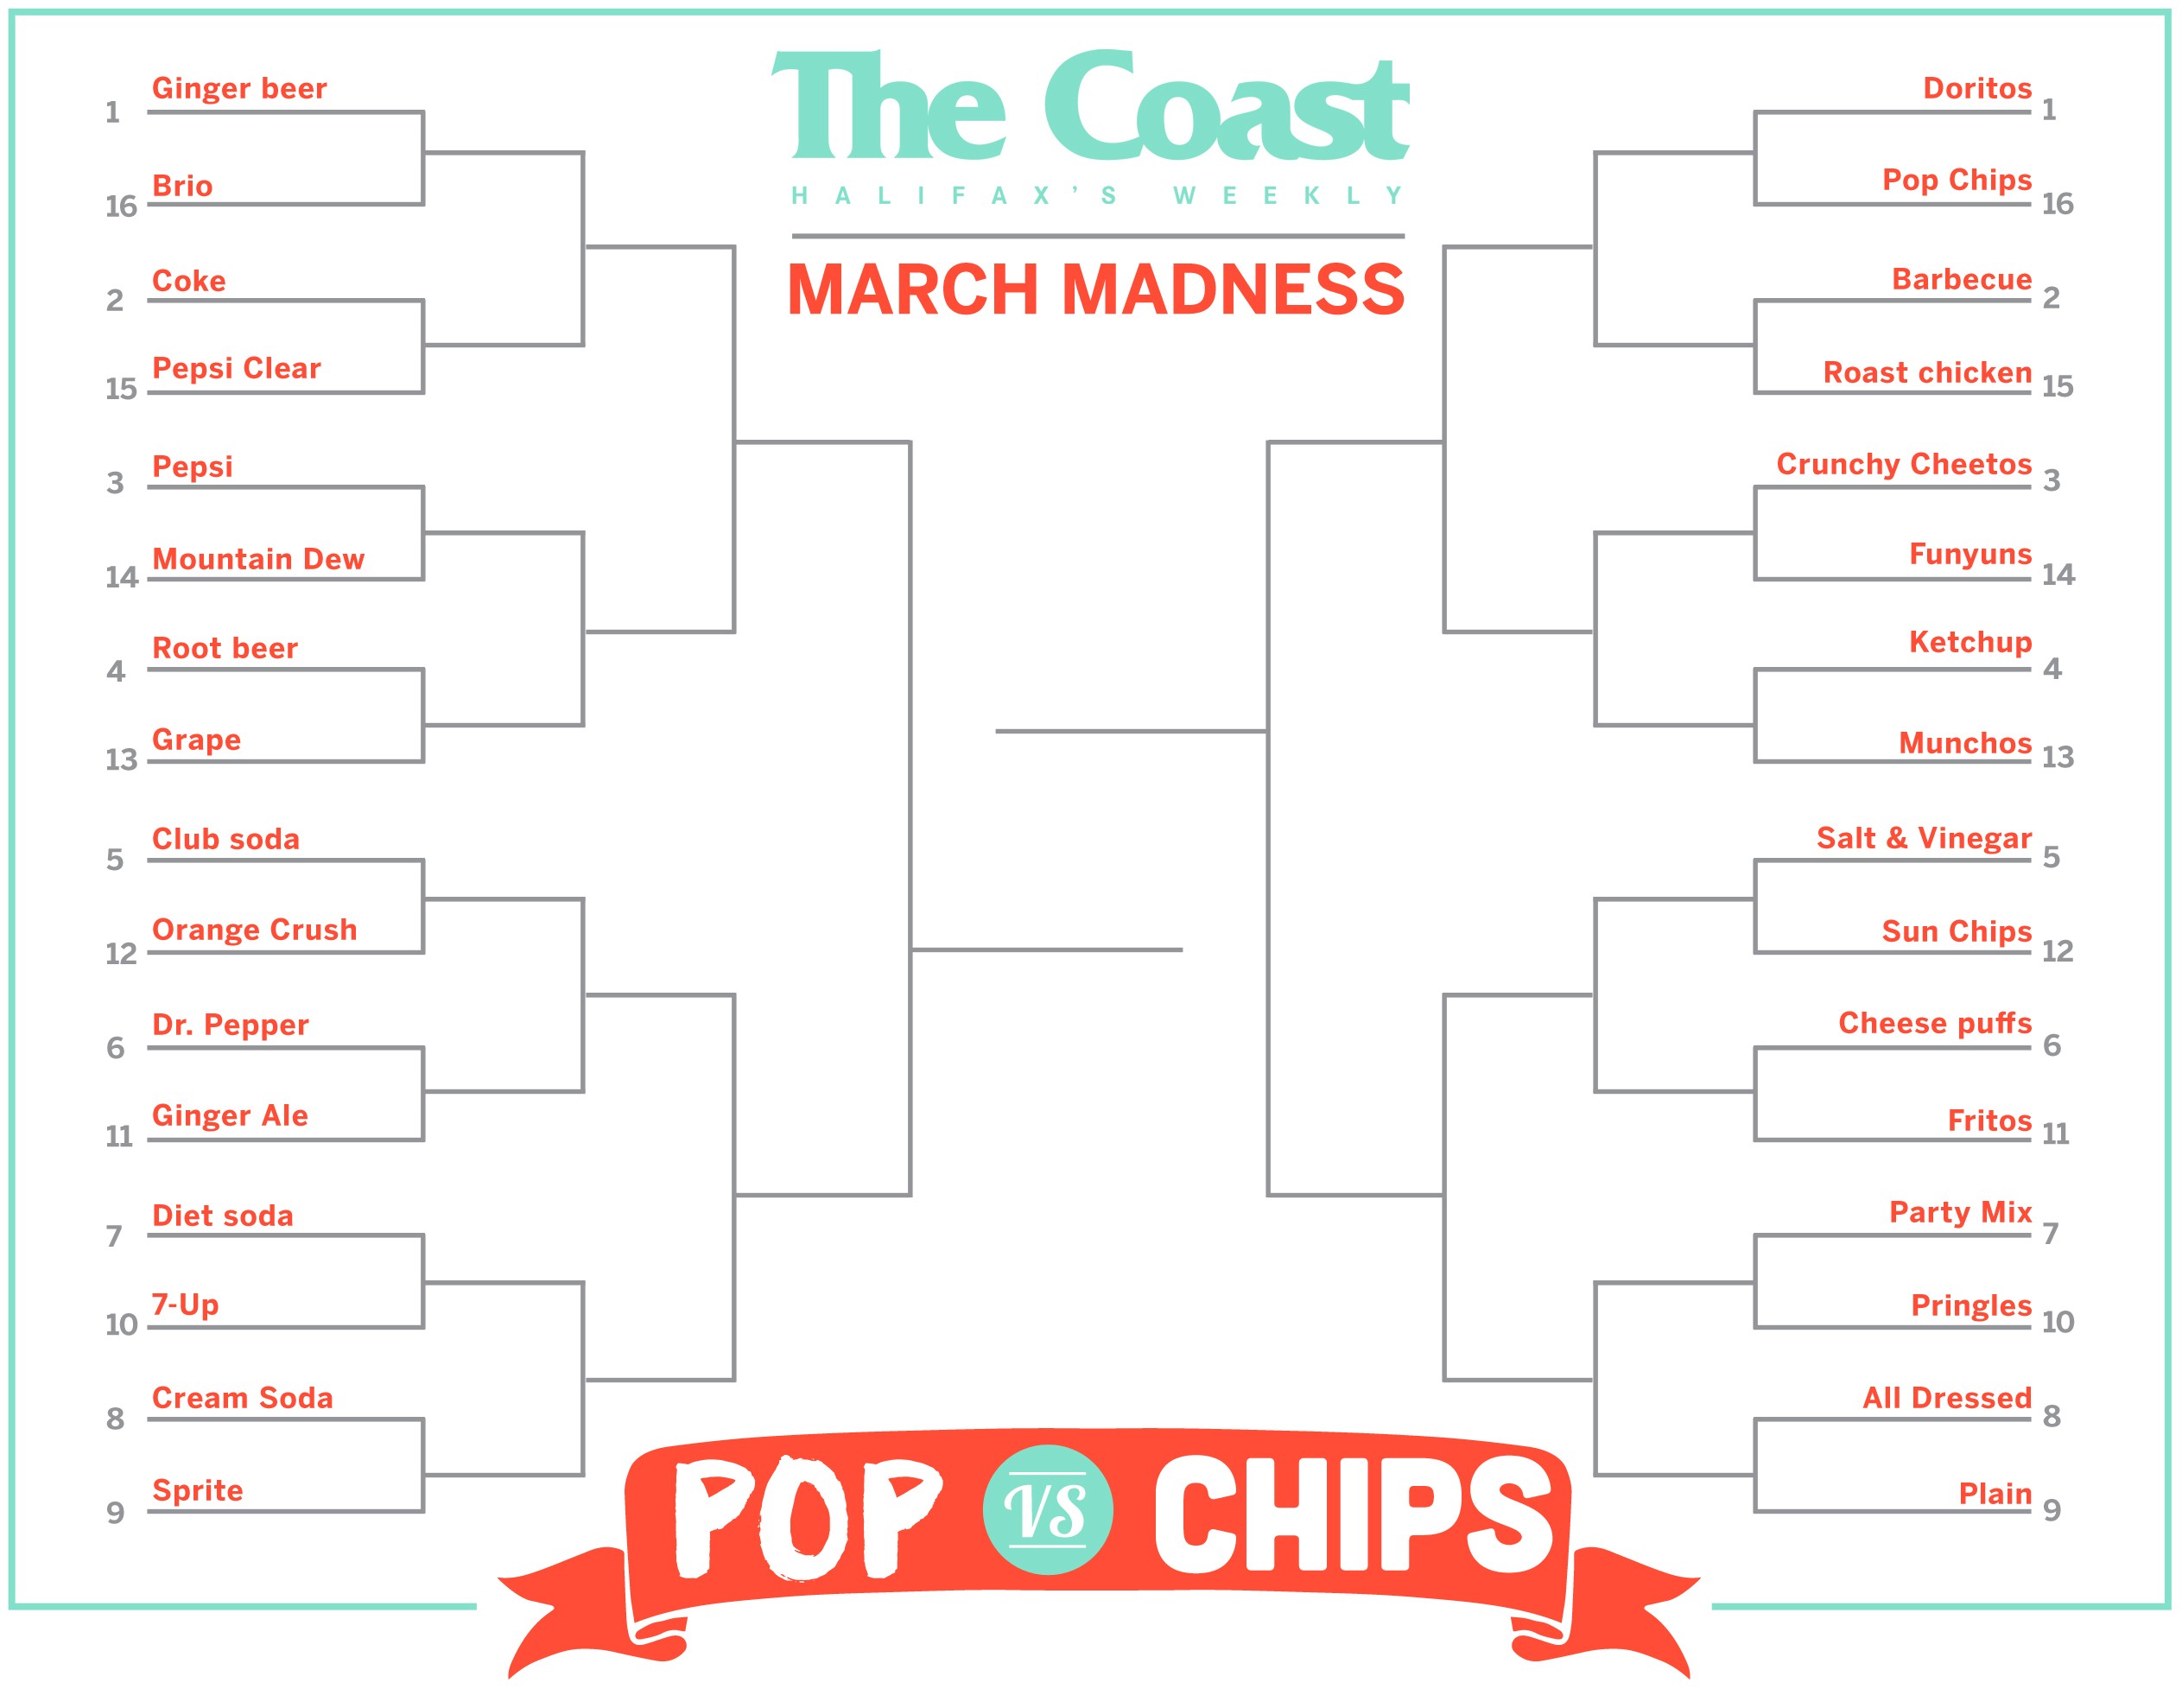 March Madness Day 3: Pepsi vs. Mountain Dew & Crunchy Cheetos vs. Funyuns